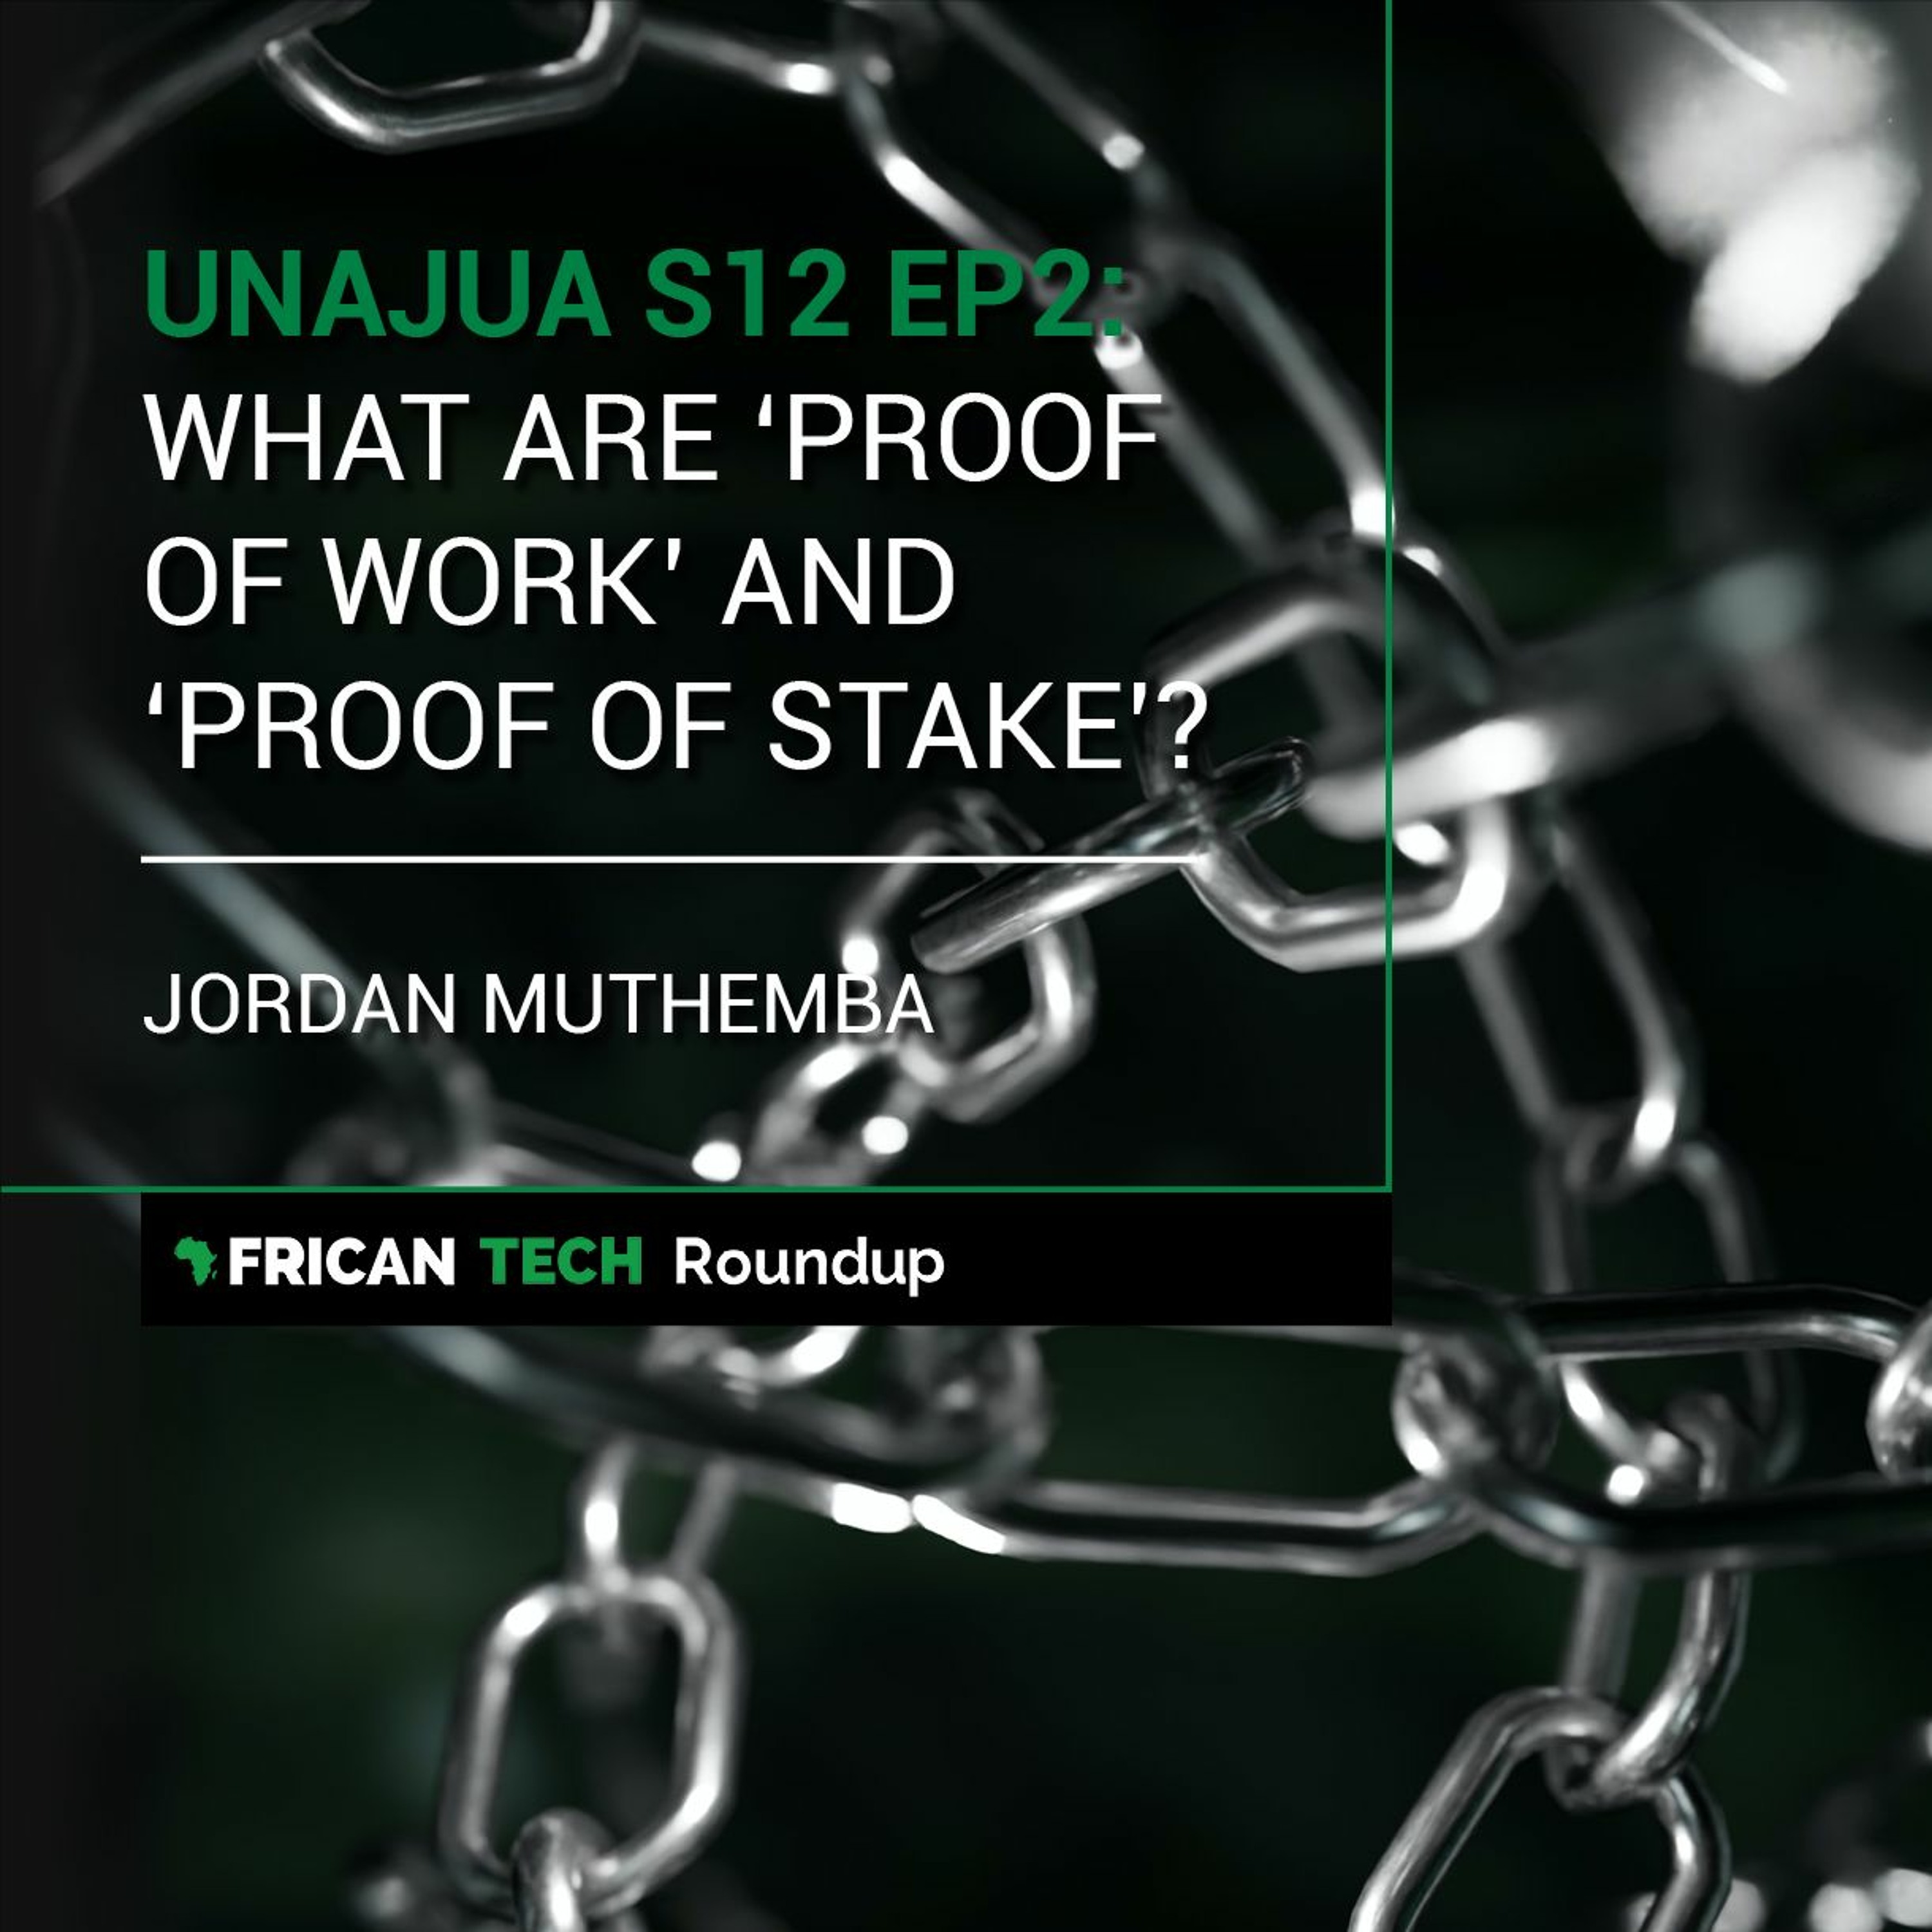 UNAJUA S12 EP2: What are 'Proof of Work' and 'Proof of Stake'? feat. Jordan Muthemba